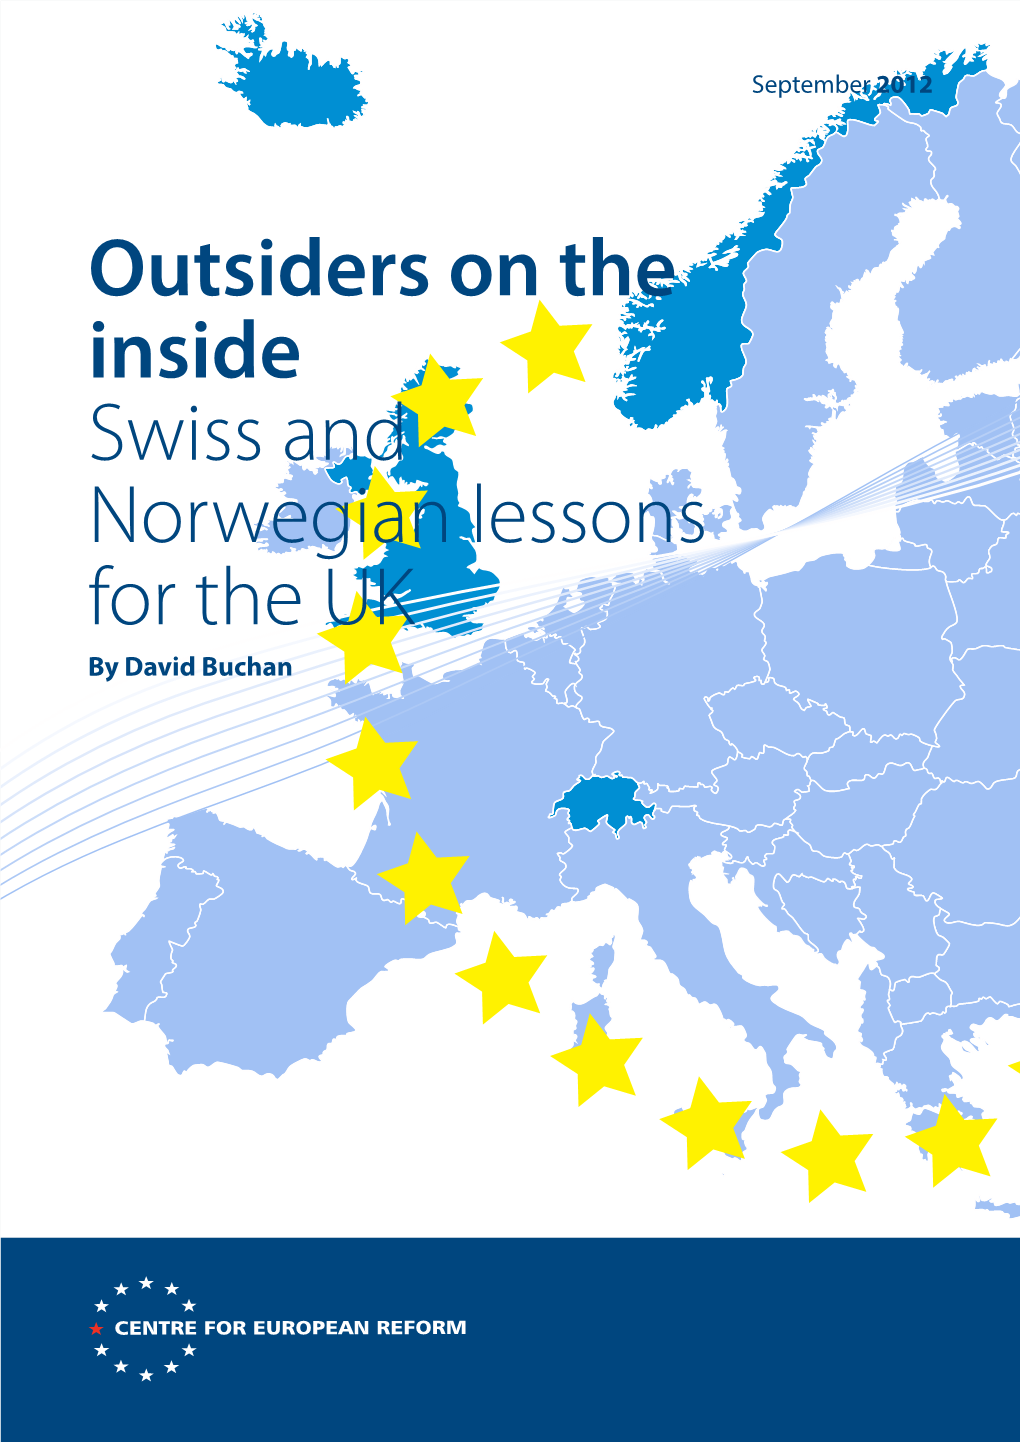 Outsiders on the Inside Swiss and Norwegian Lessons for the UK by David Buchan Outsiders on the Inside: Swiss and Norwegian Lessons for the UK by David Buchan